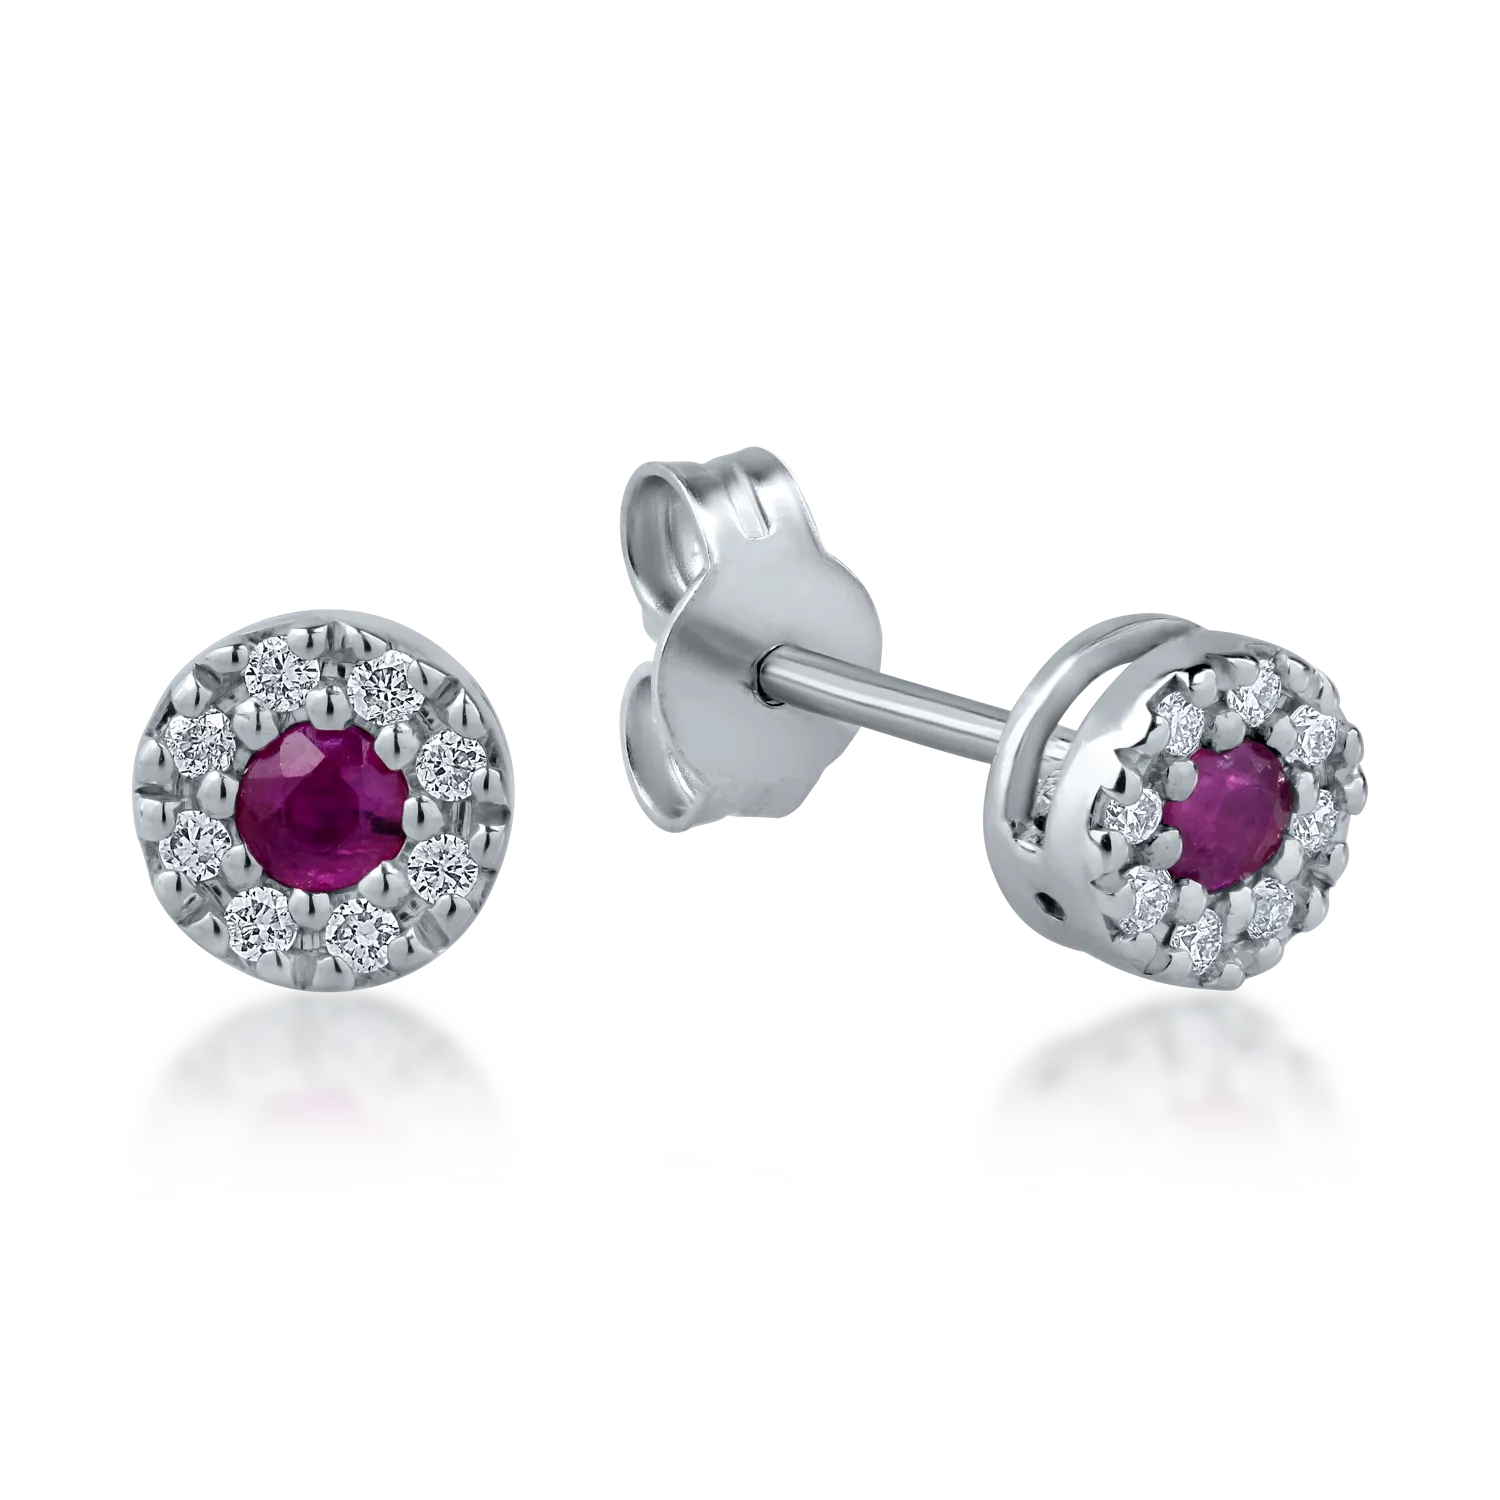 White gold earrings with 0.17ct rubies and 0.08ct diamonds